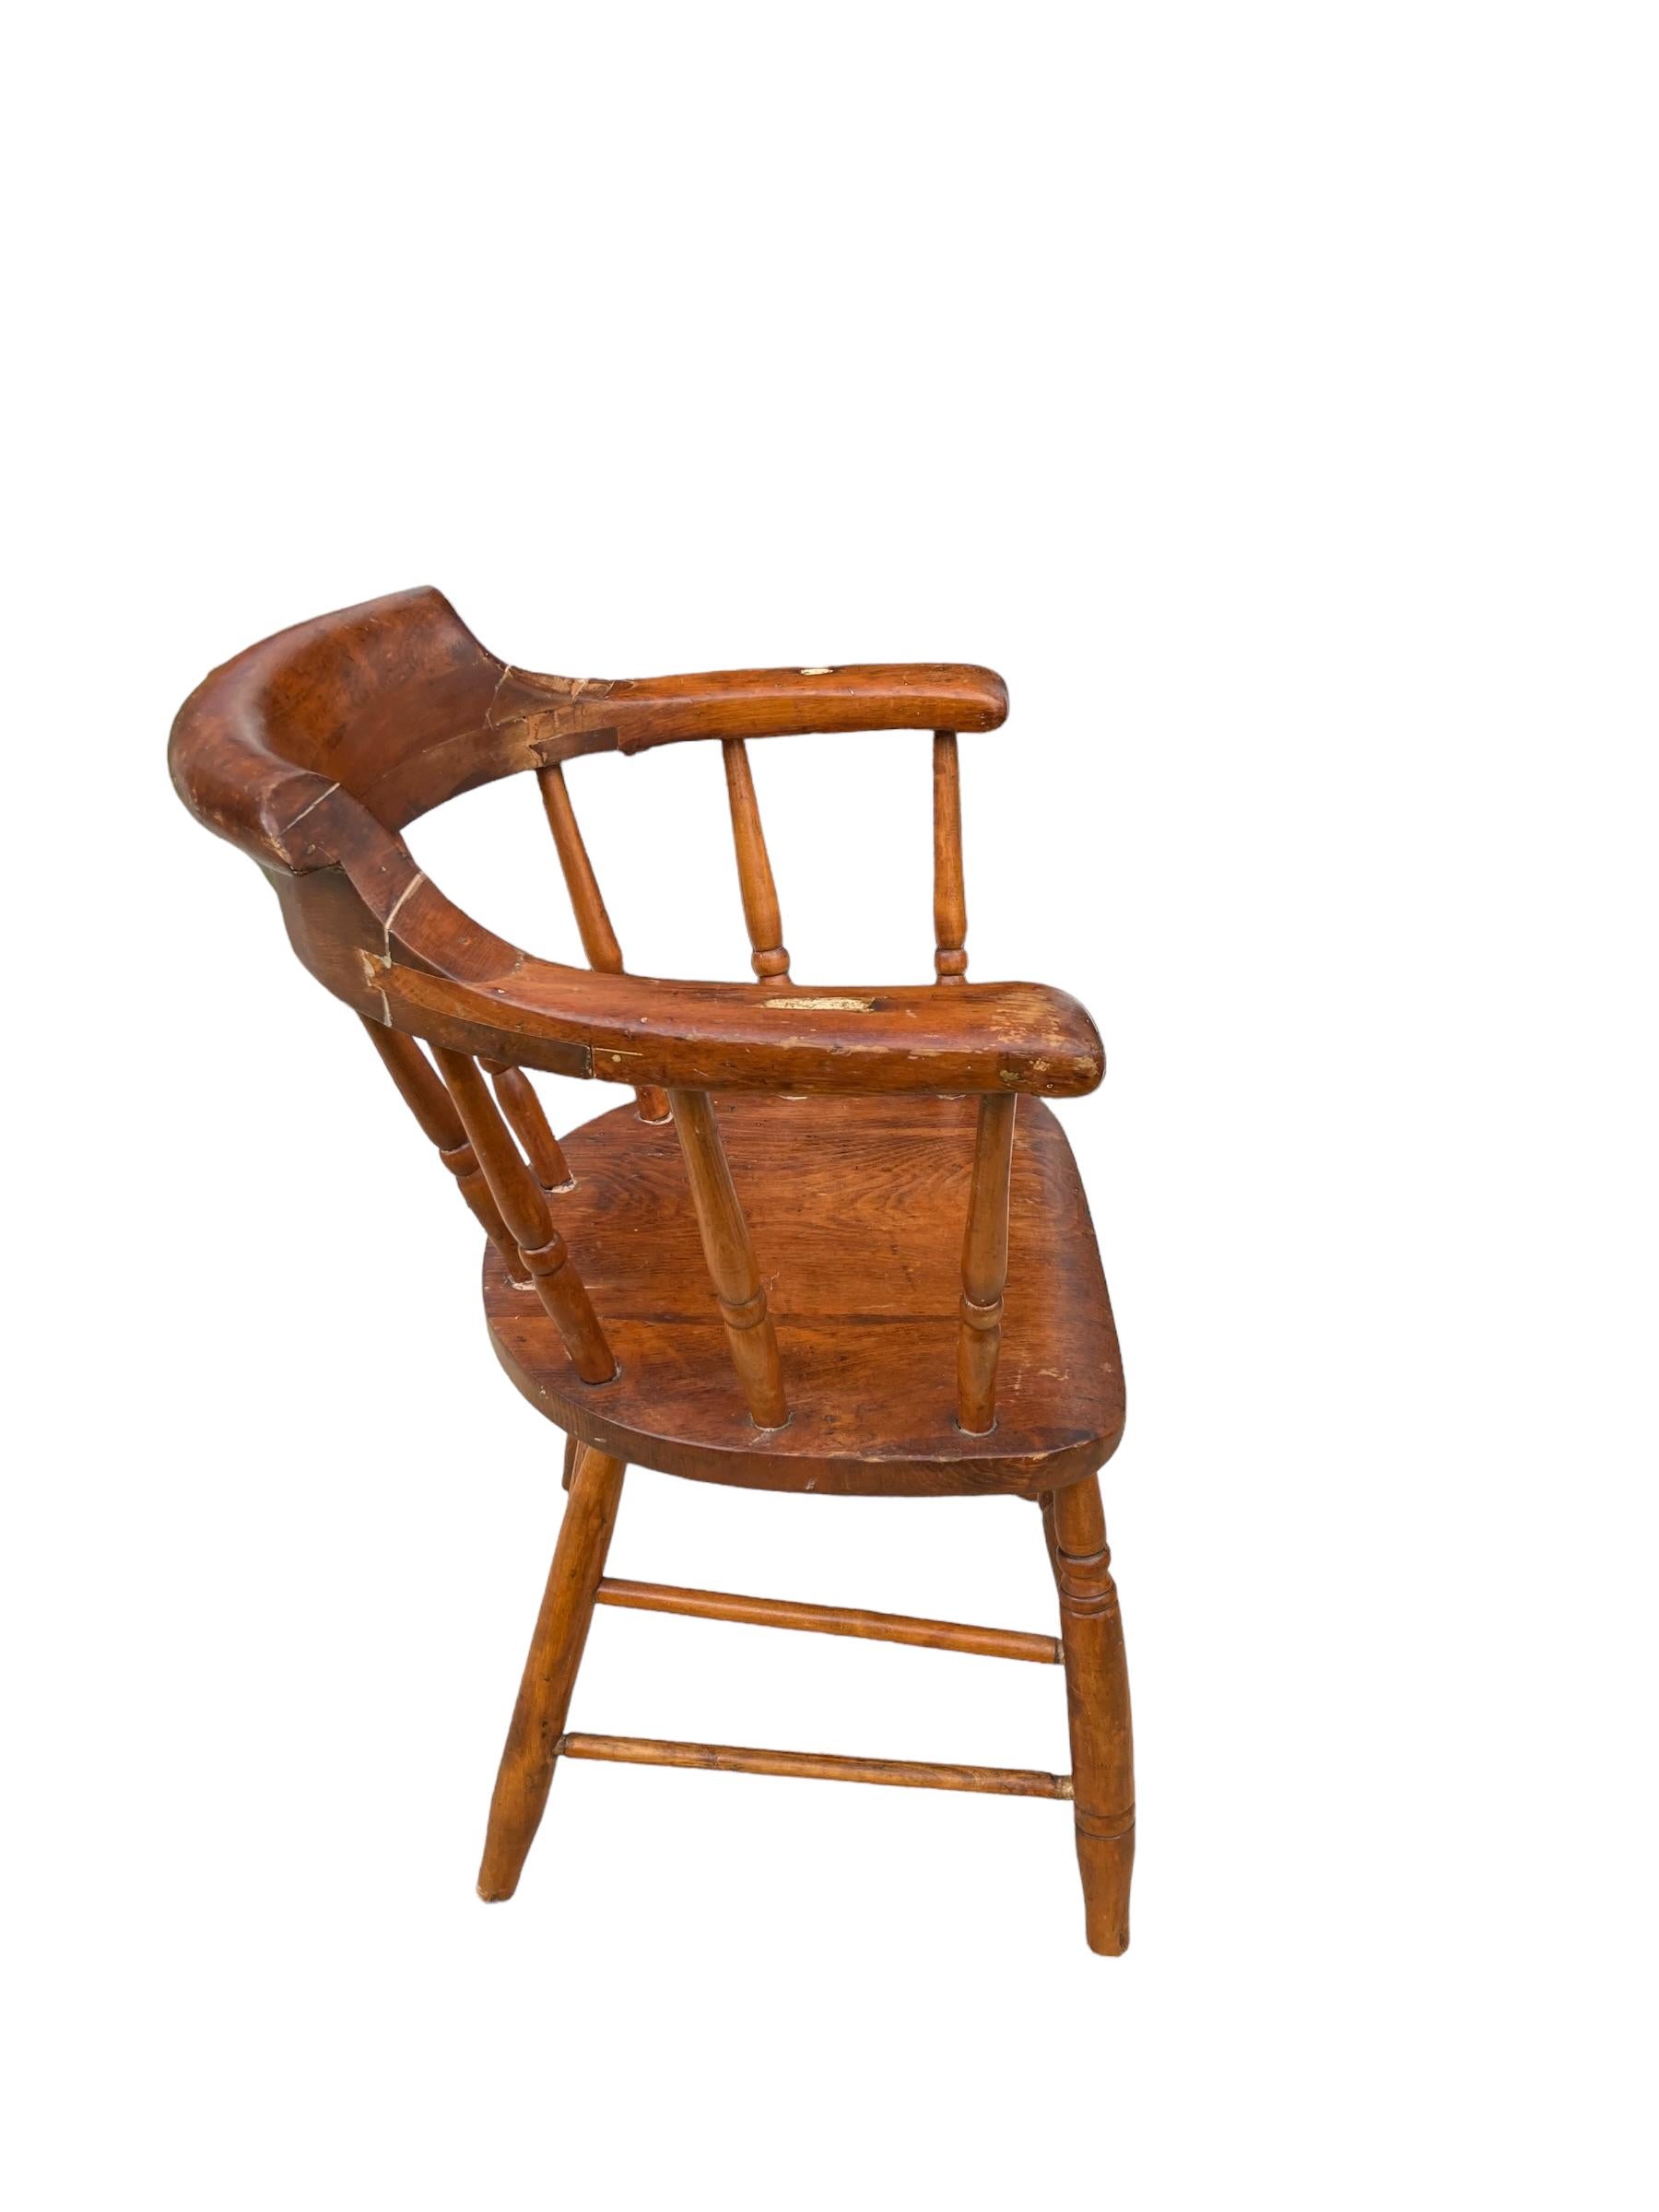 19th Century Antique Captains or Smokers Bow back armchair